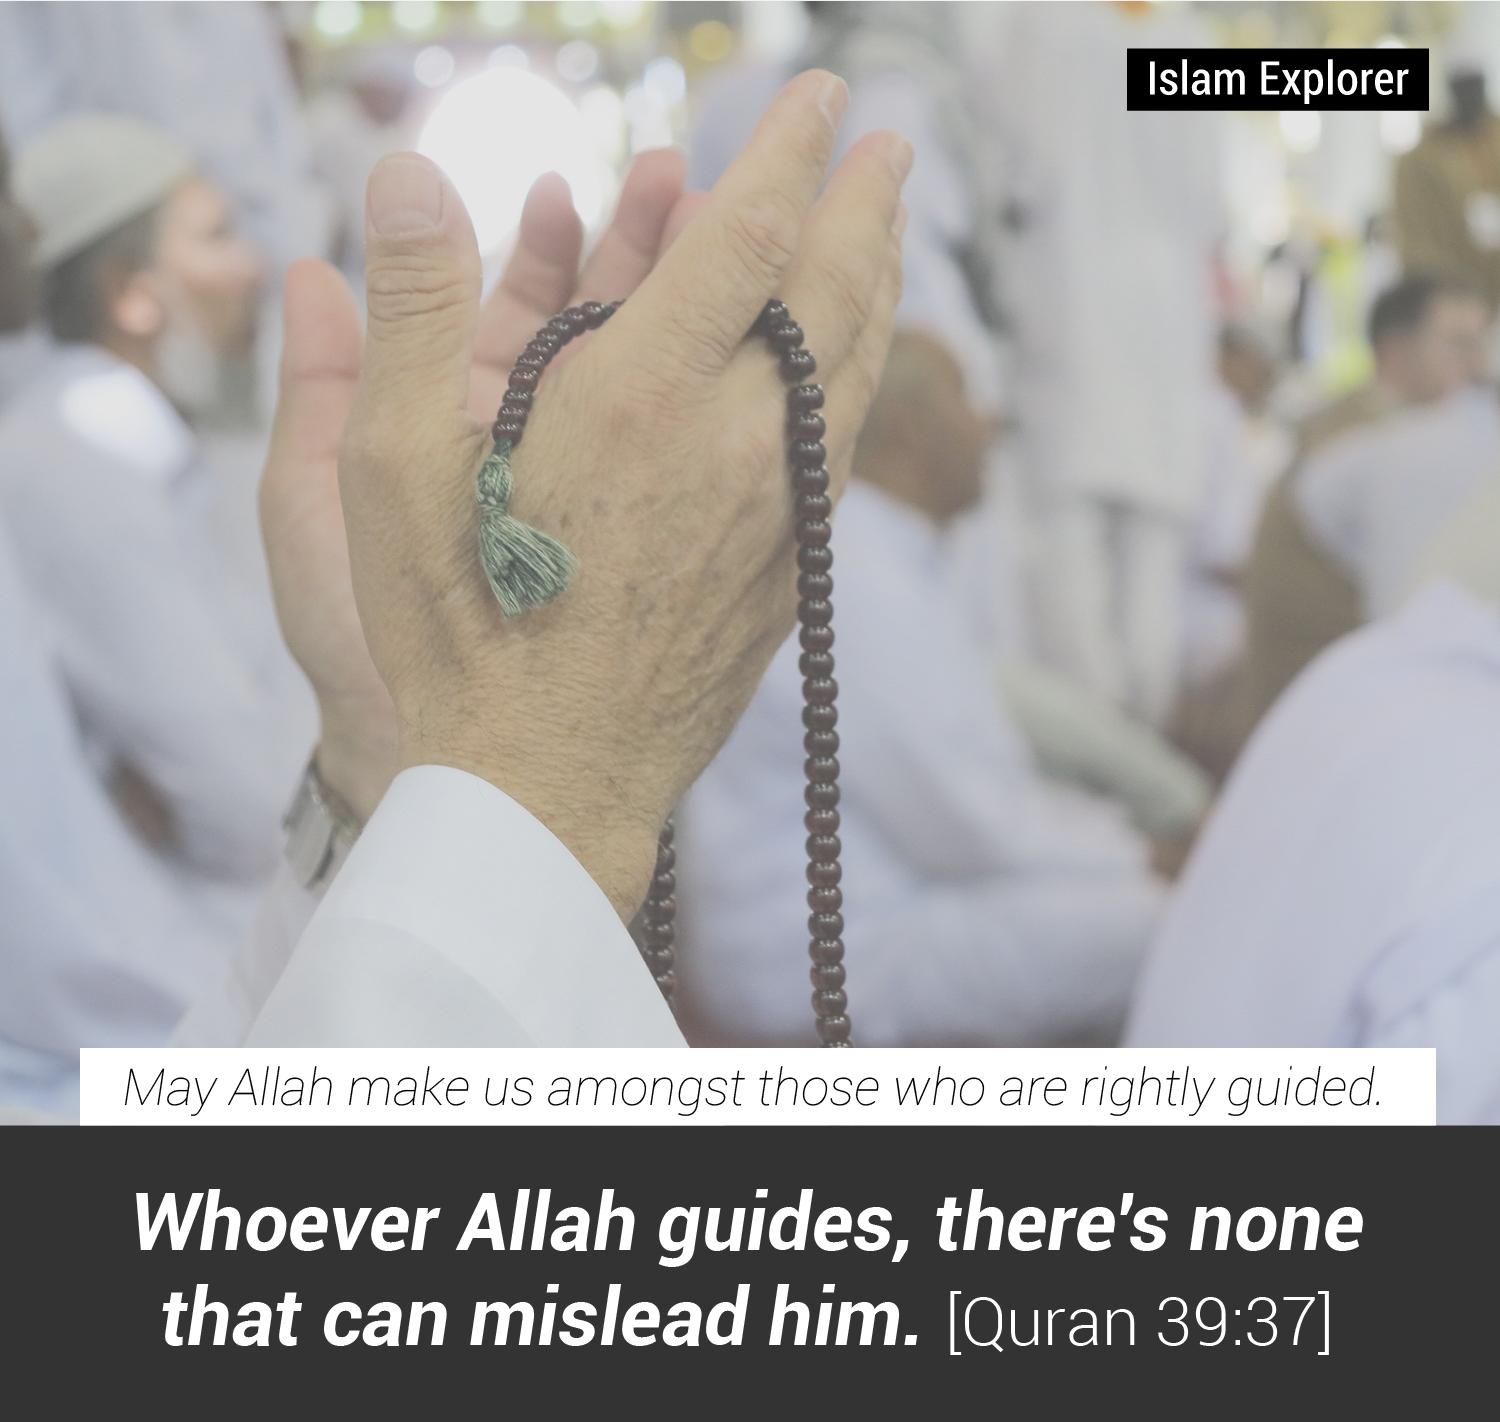 May Allah make us amongst those who rightly guided. 